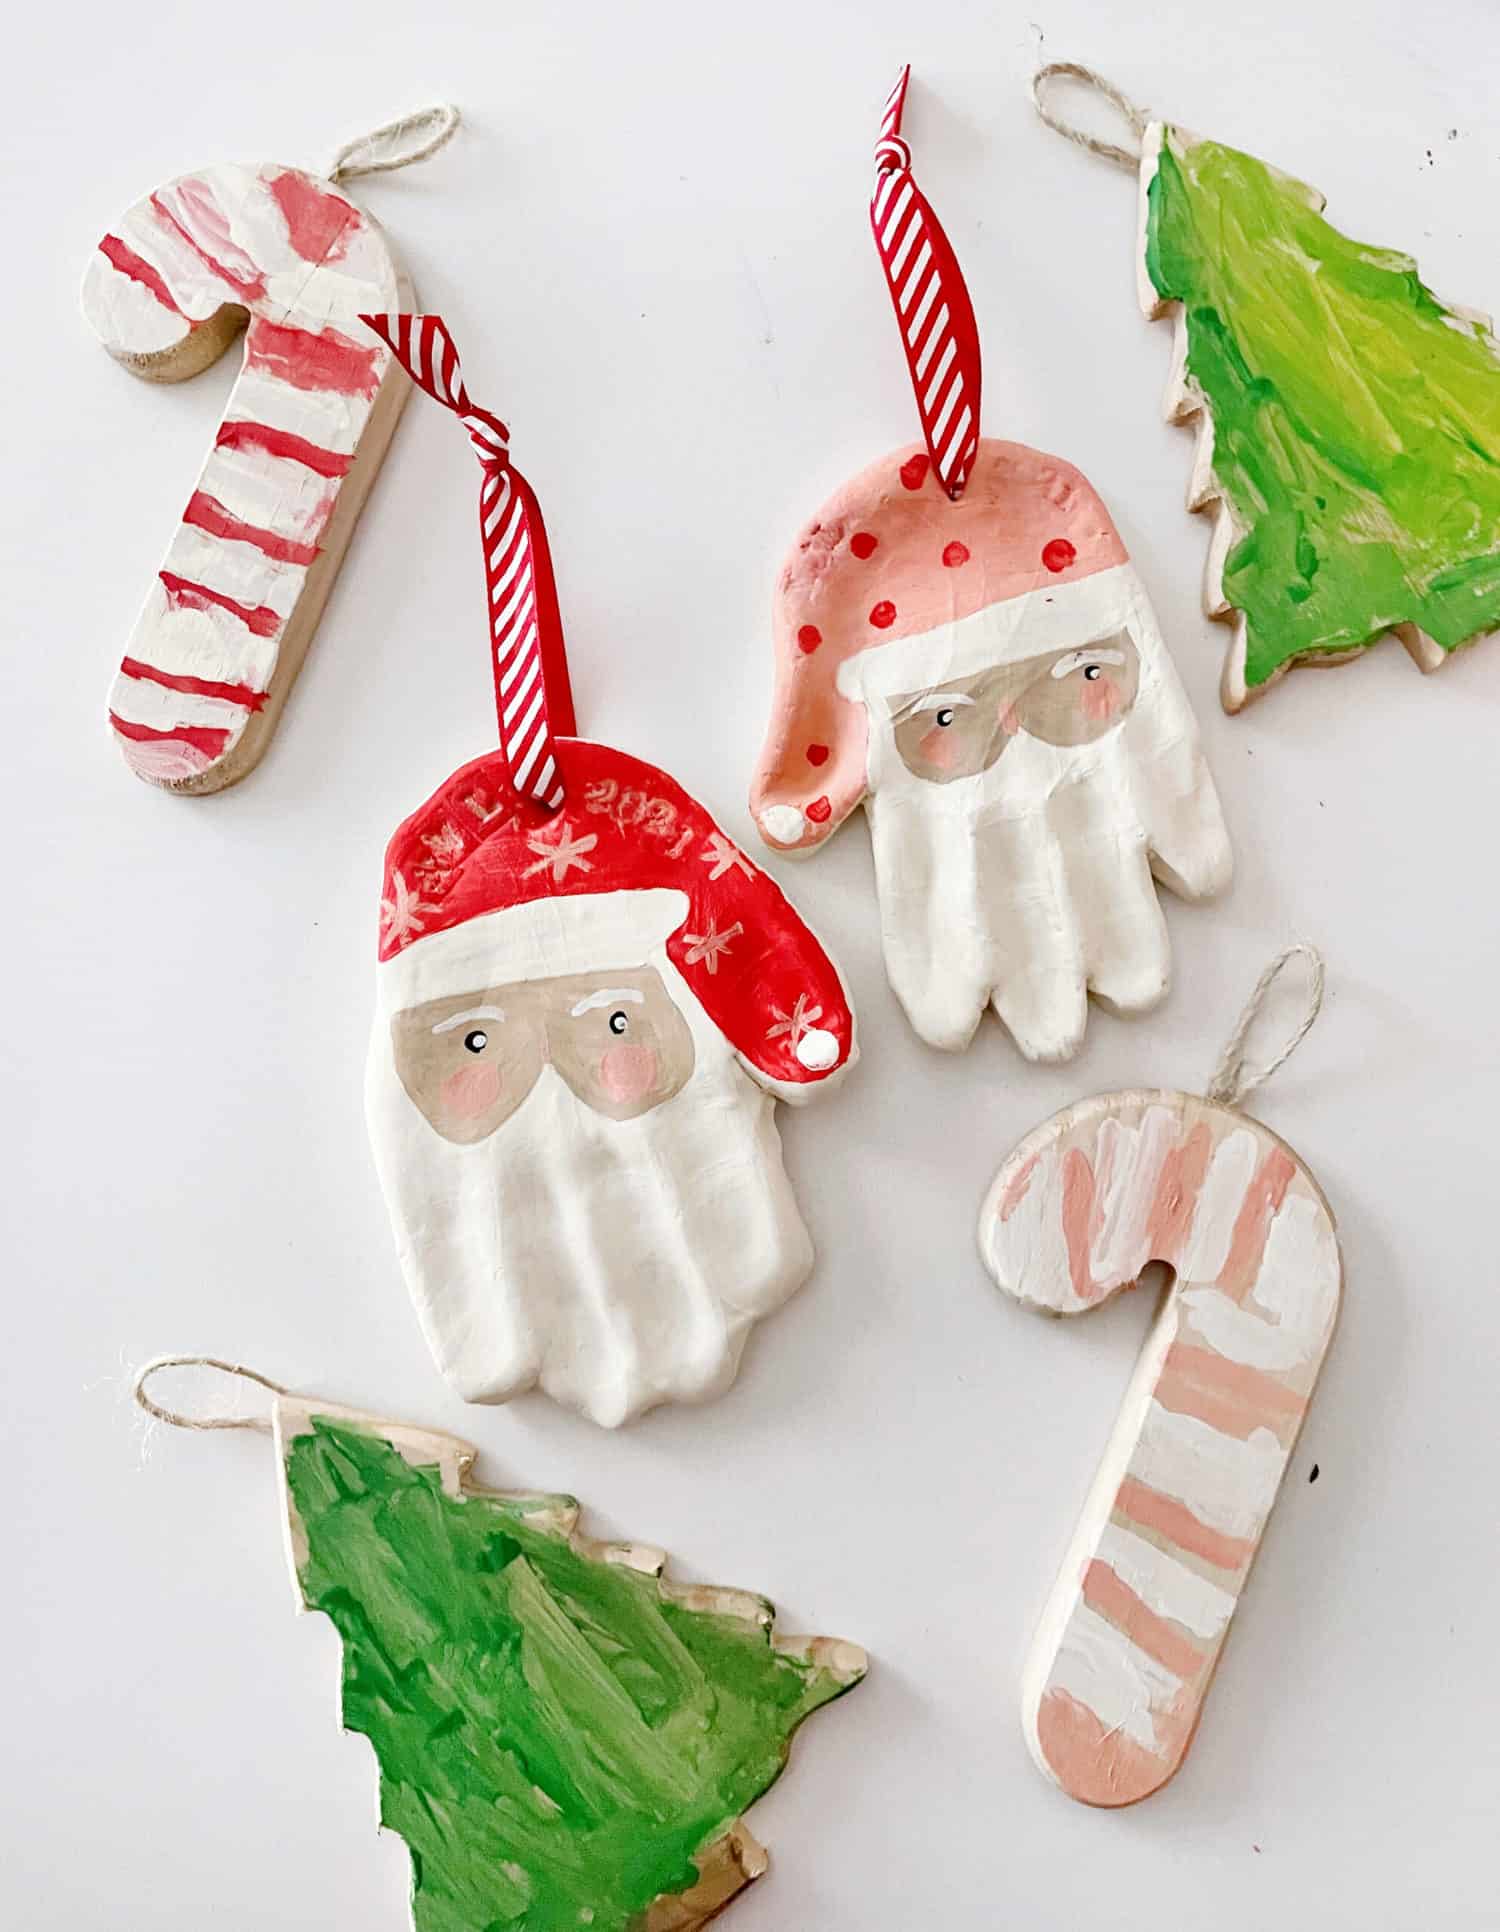 https://abeautifulmess.com/wp-content/uploads/2021/11/Easy-ornaments-to-make-with-kids-scaled.jpg